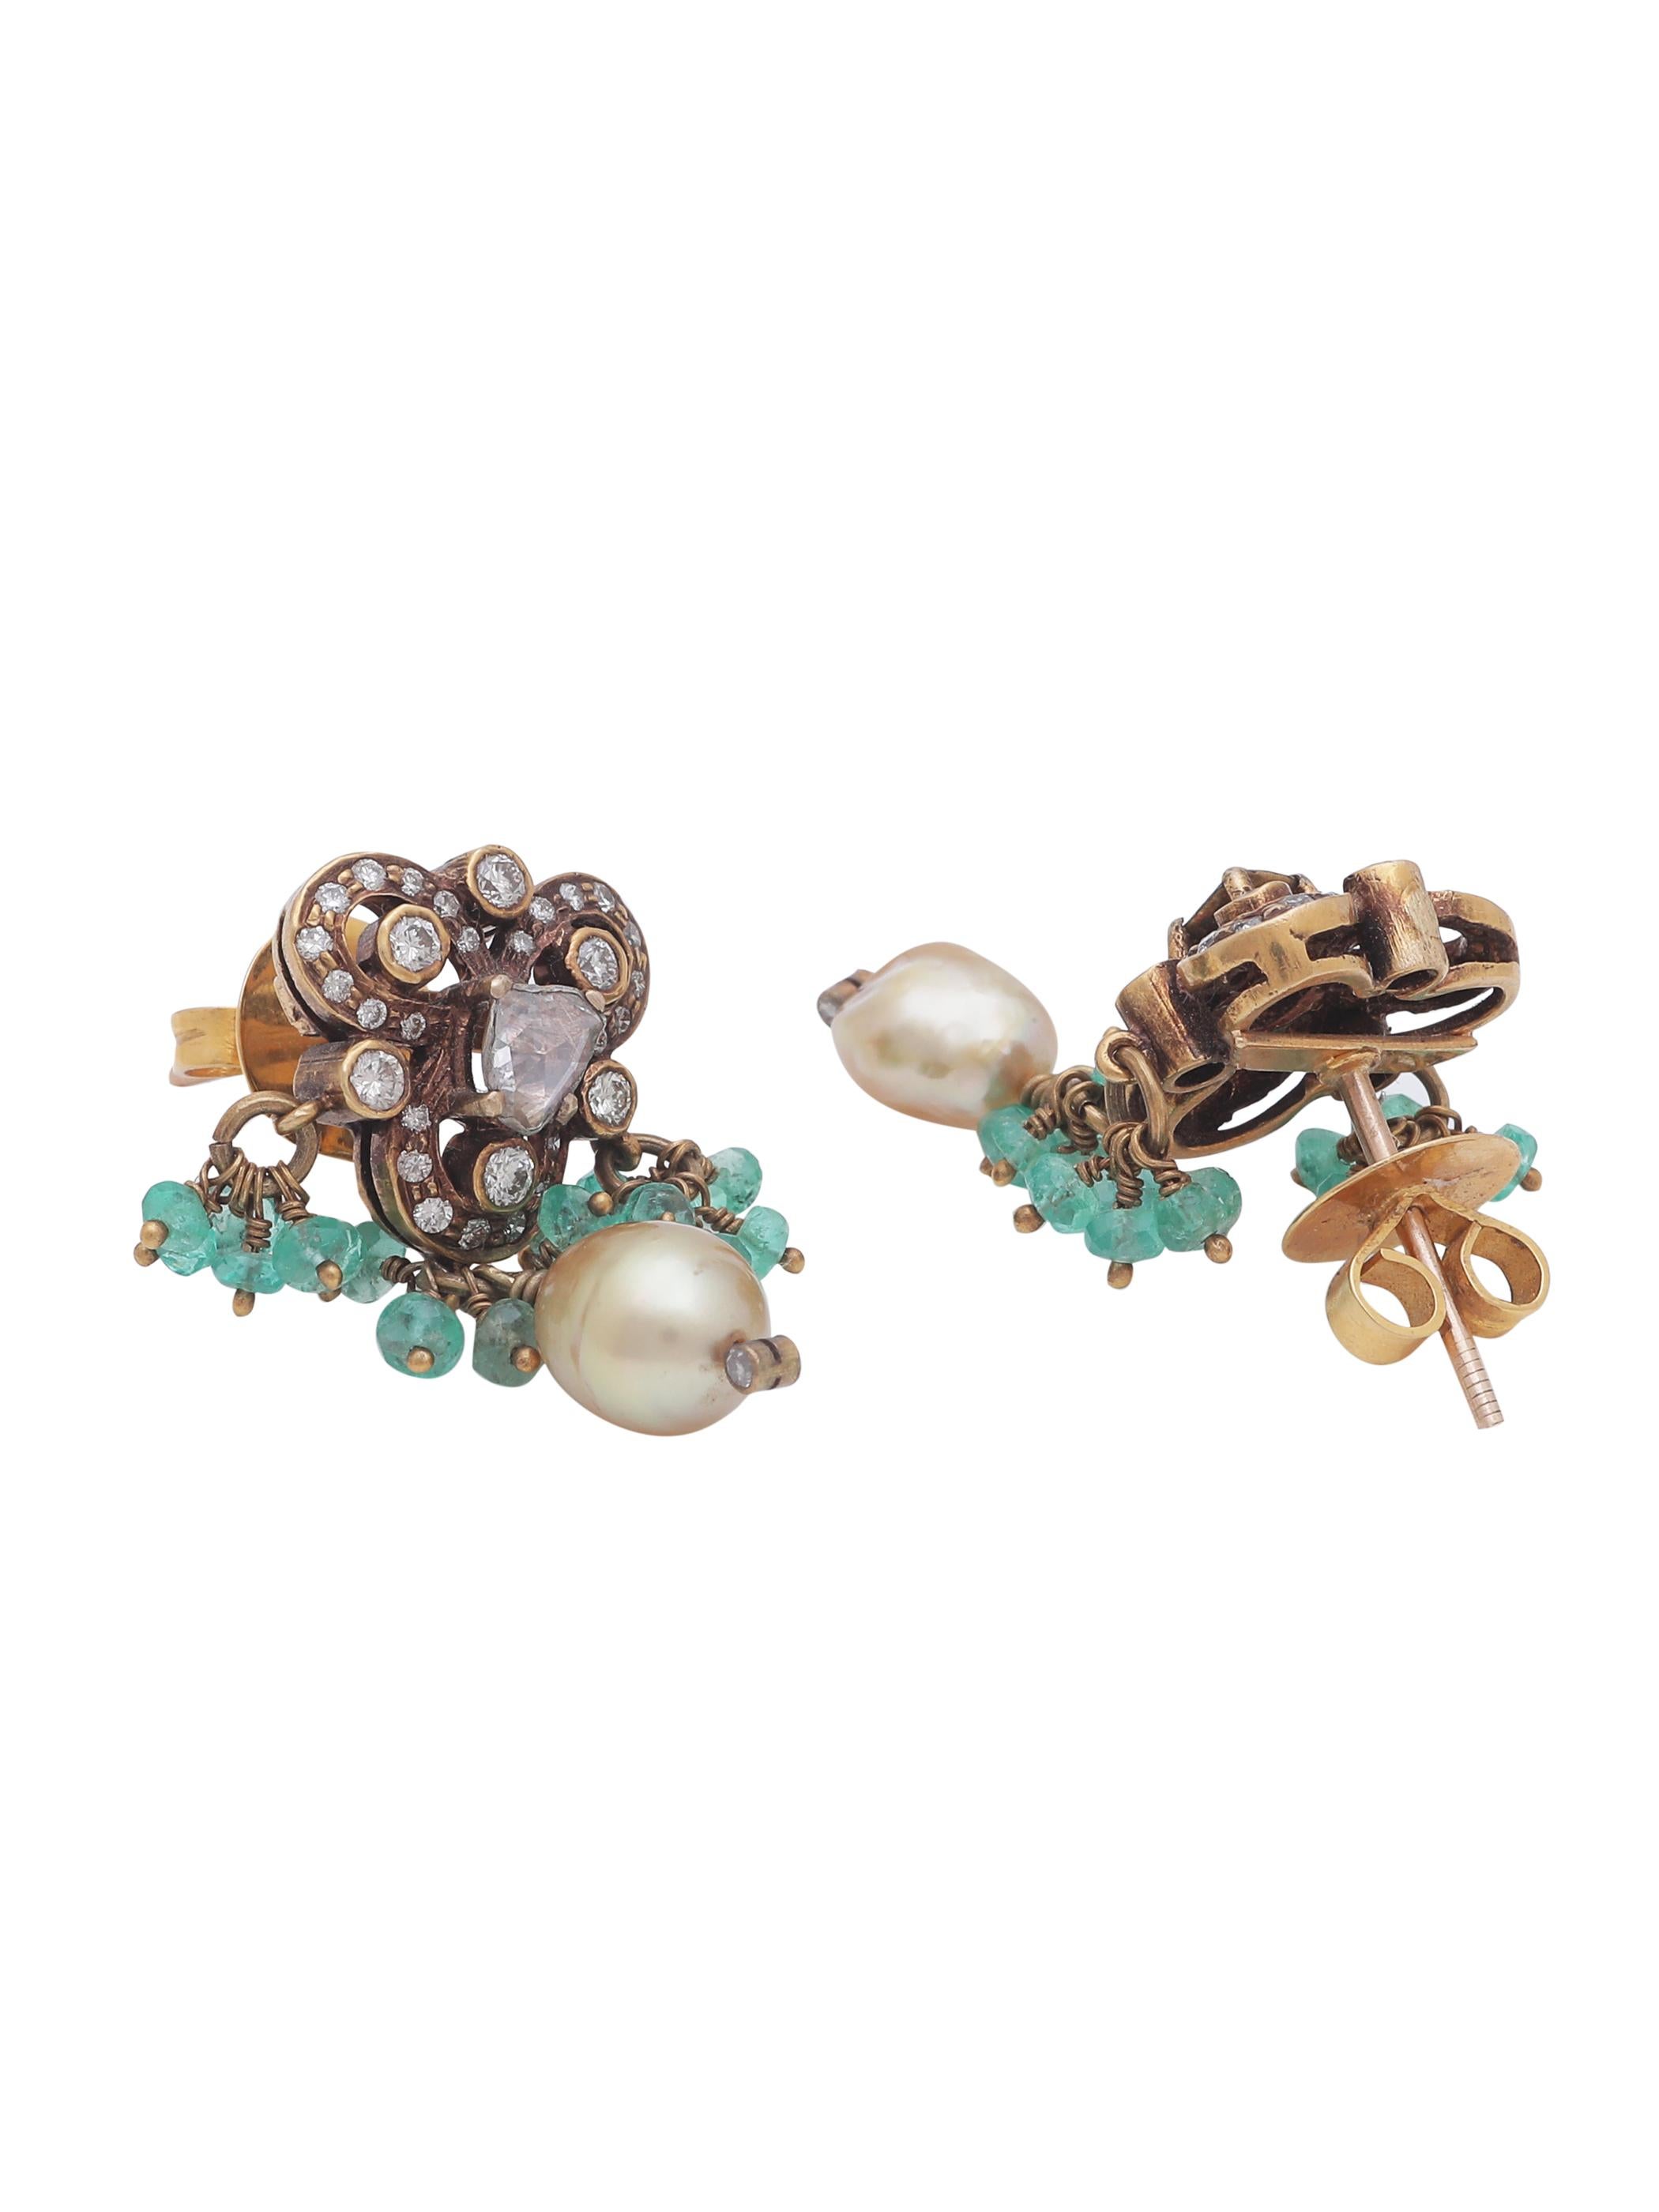 A Victorian style earring pair with diamonds, Emerald beads and a drop shape pearl hanging. The petit and delicate earring is handmade in 18K Gold and has incredible detailing all around. The moving bunch of Emerald facetted beads are strung in Gold